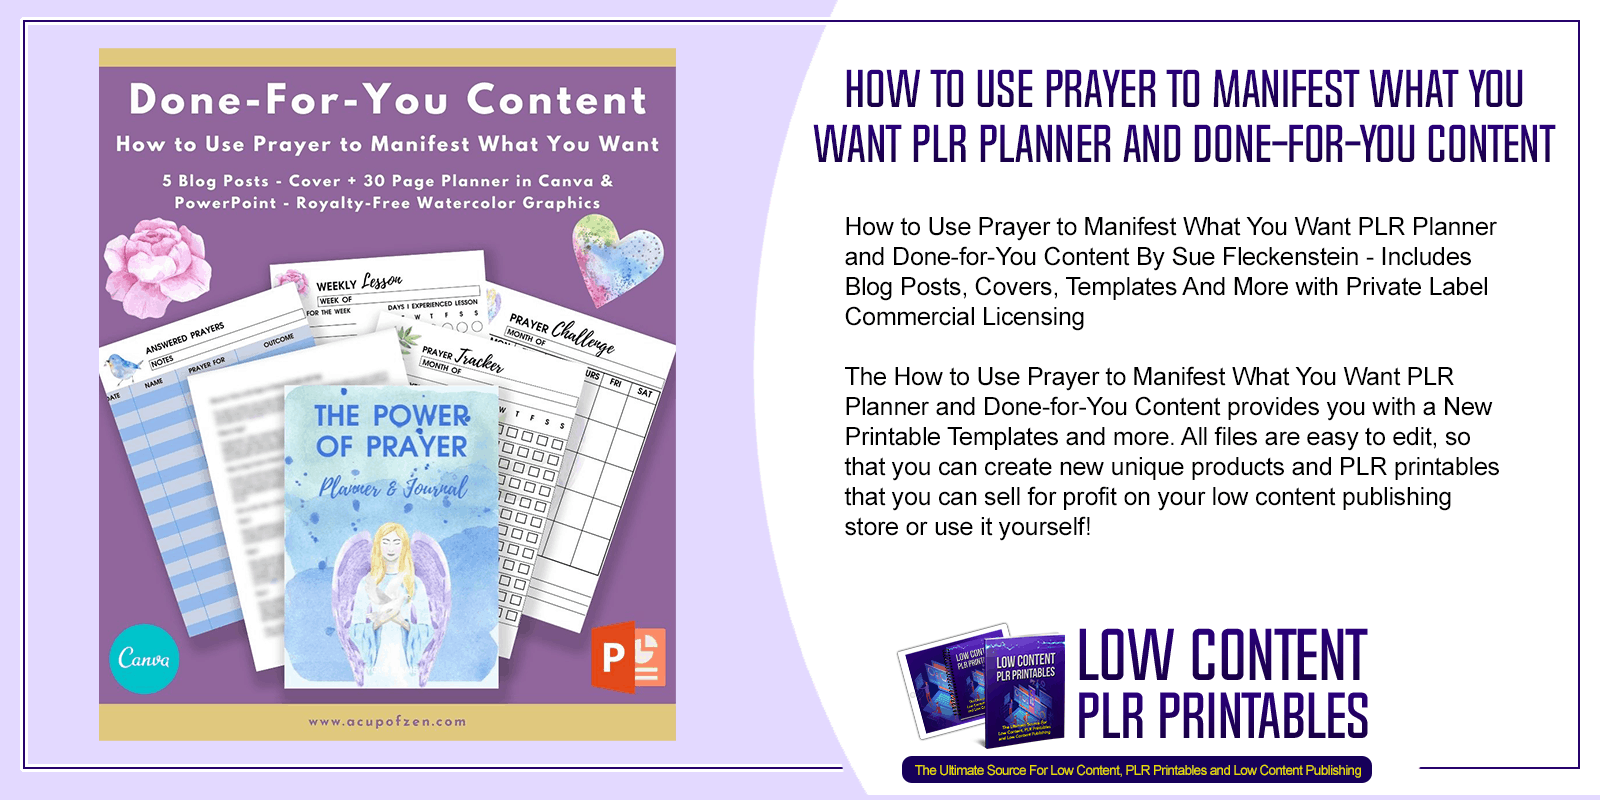 How to Use Prayer to Manifest What You Want PLR Planner and Done for You Content